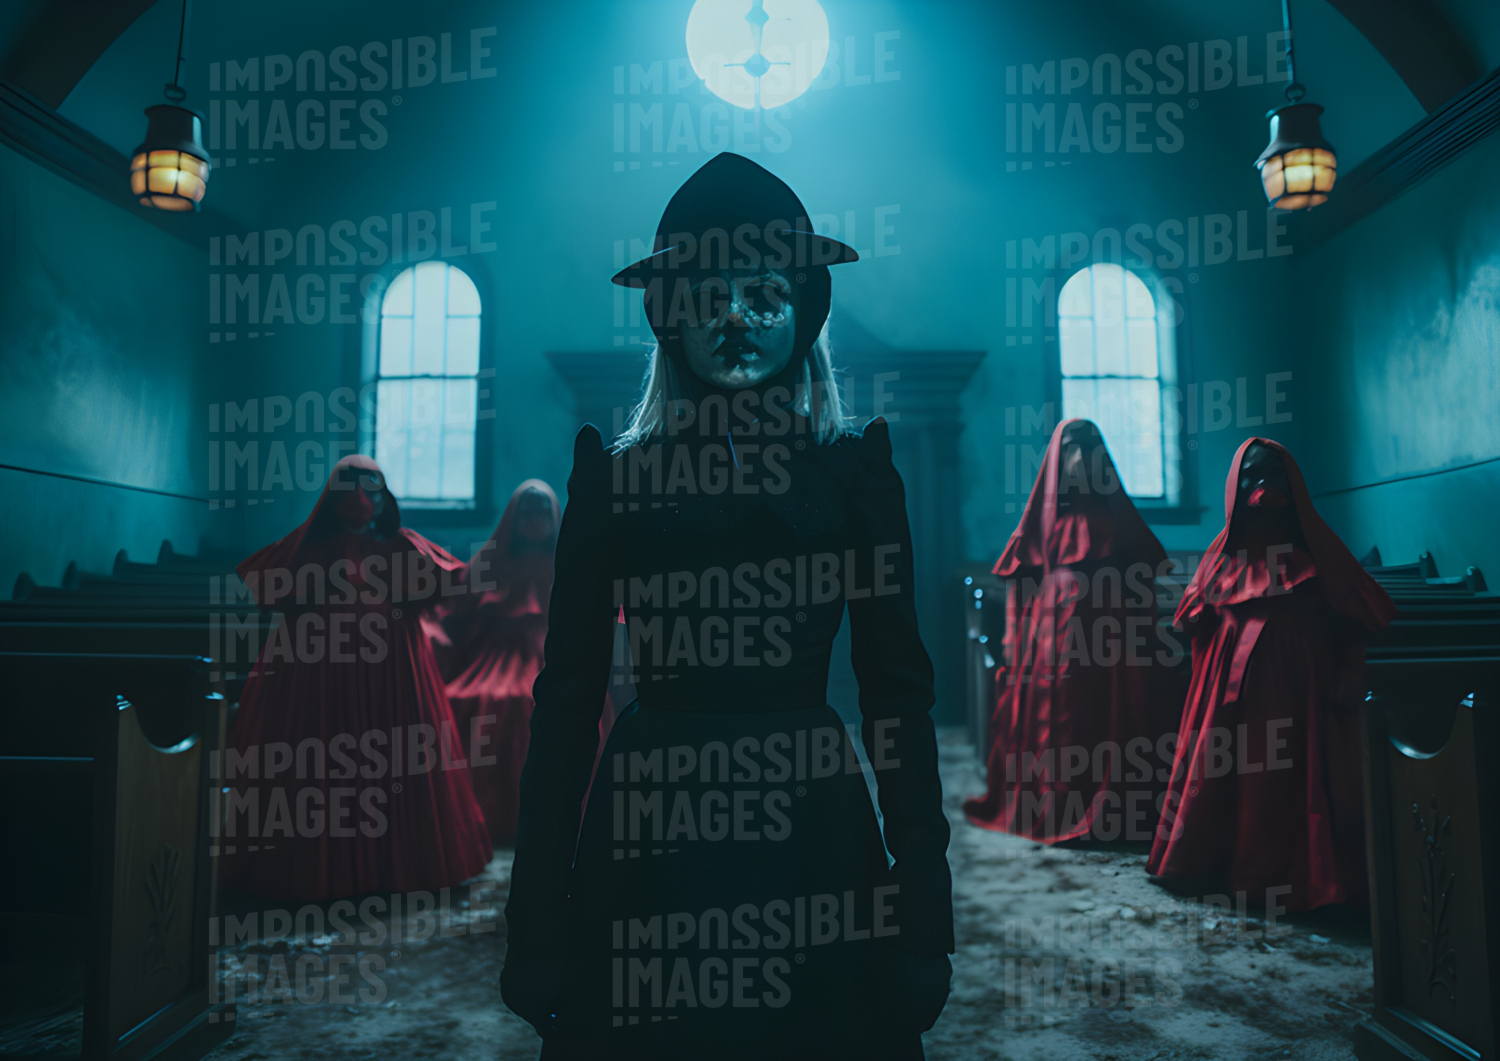 Strange woman in a church with figures in red capes -  A mysterious woman stands in a church, surrounded by figures wearing red capes. Their purpose is unknown.